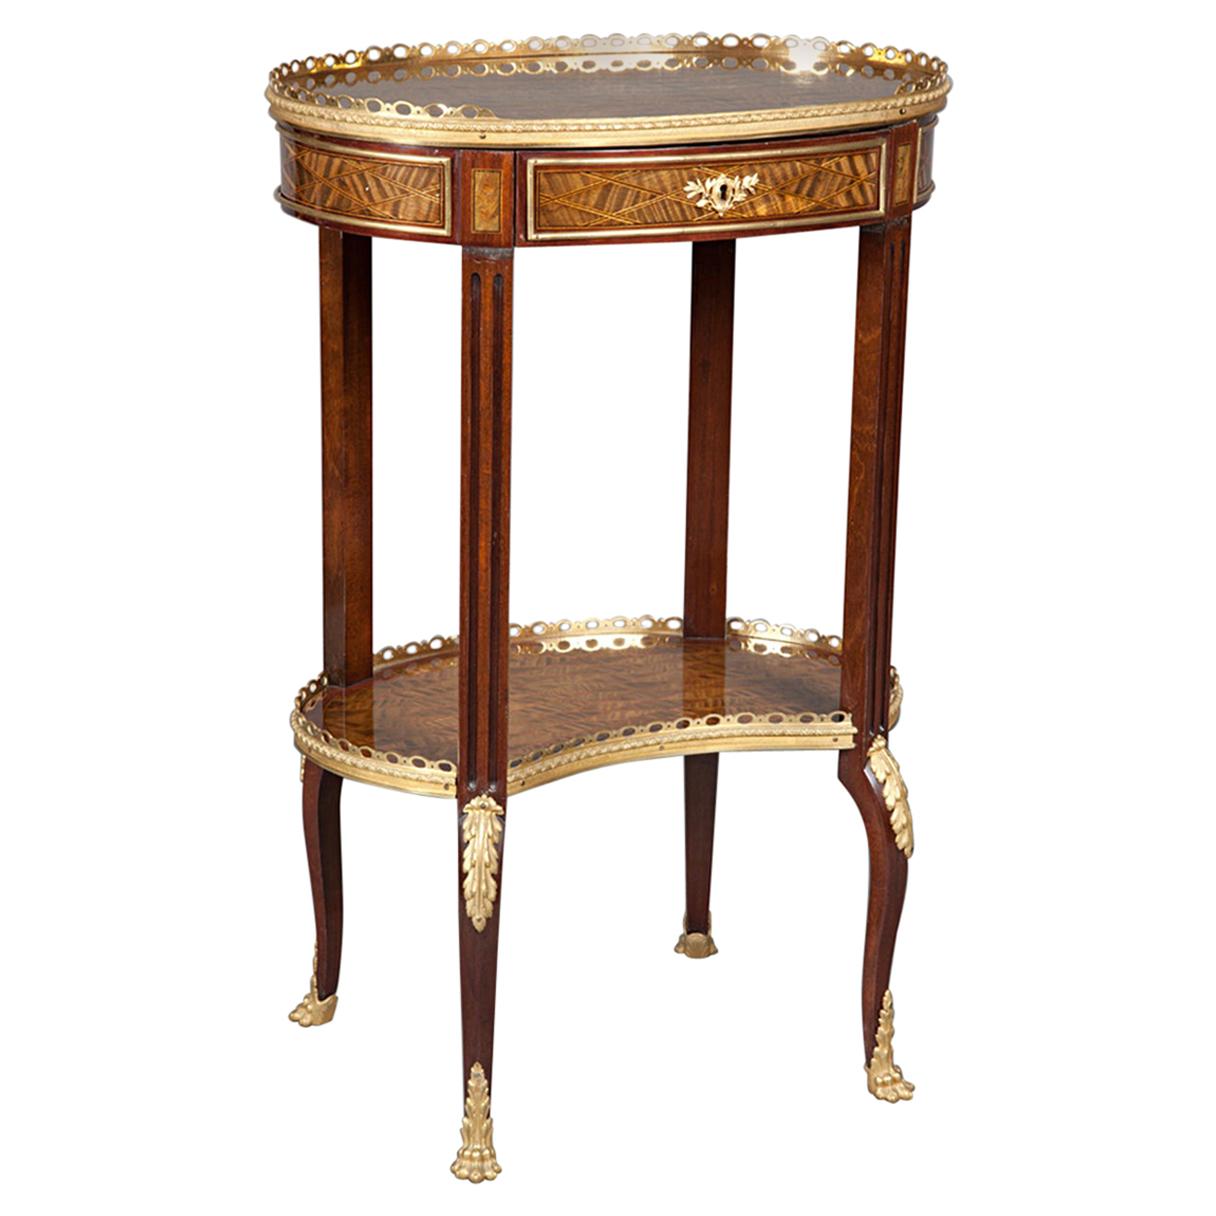 Louis XV-Style Ormolu-Mounted Inlaid Tulipwood and Mahogany Galleried Oval Table